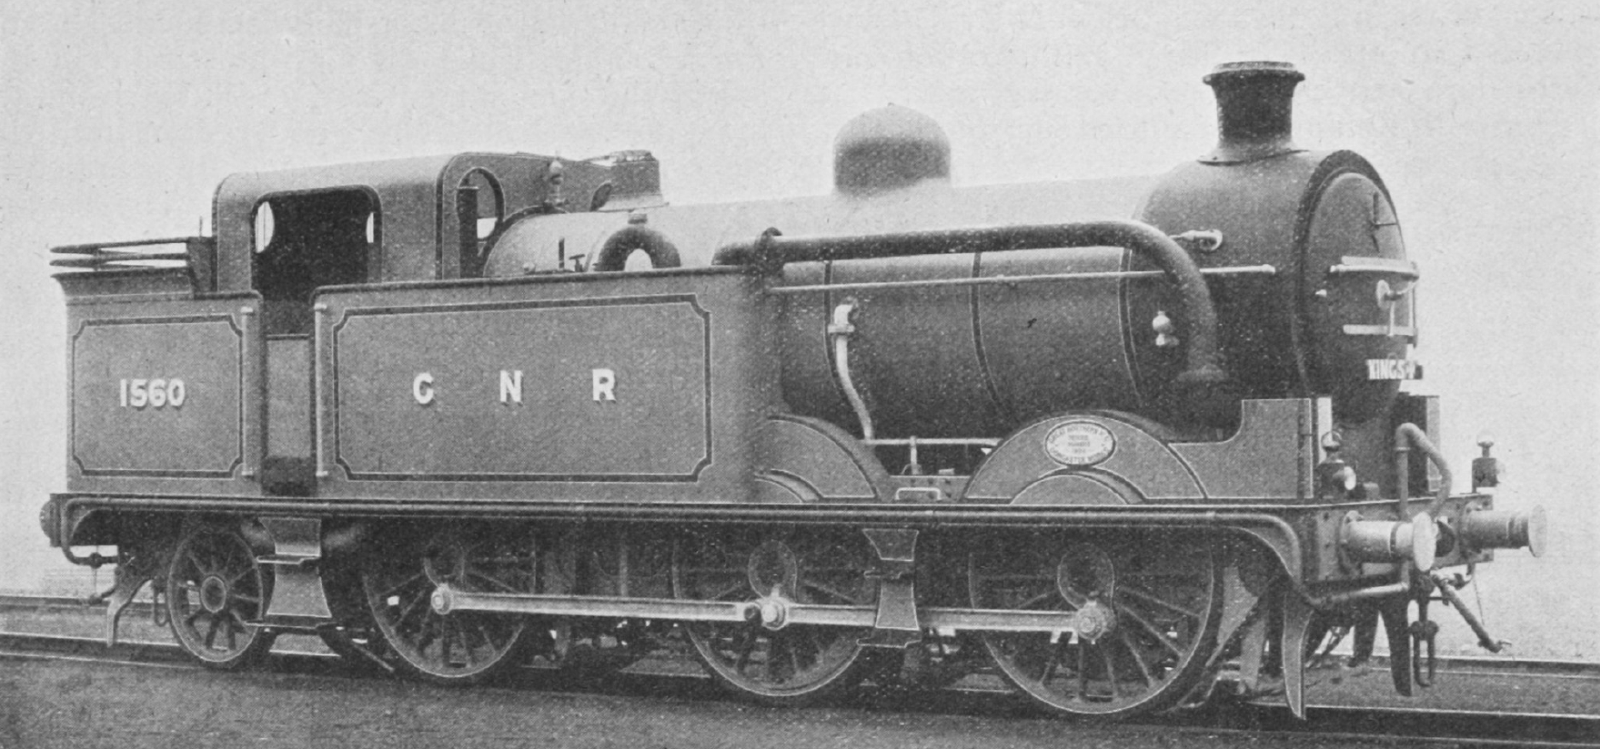 No. 1560 after the weight distribution adjustments